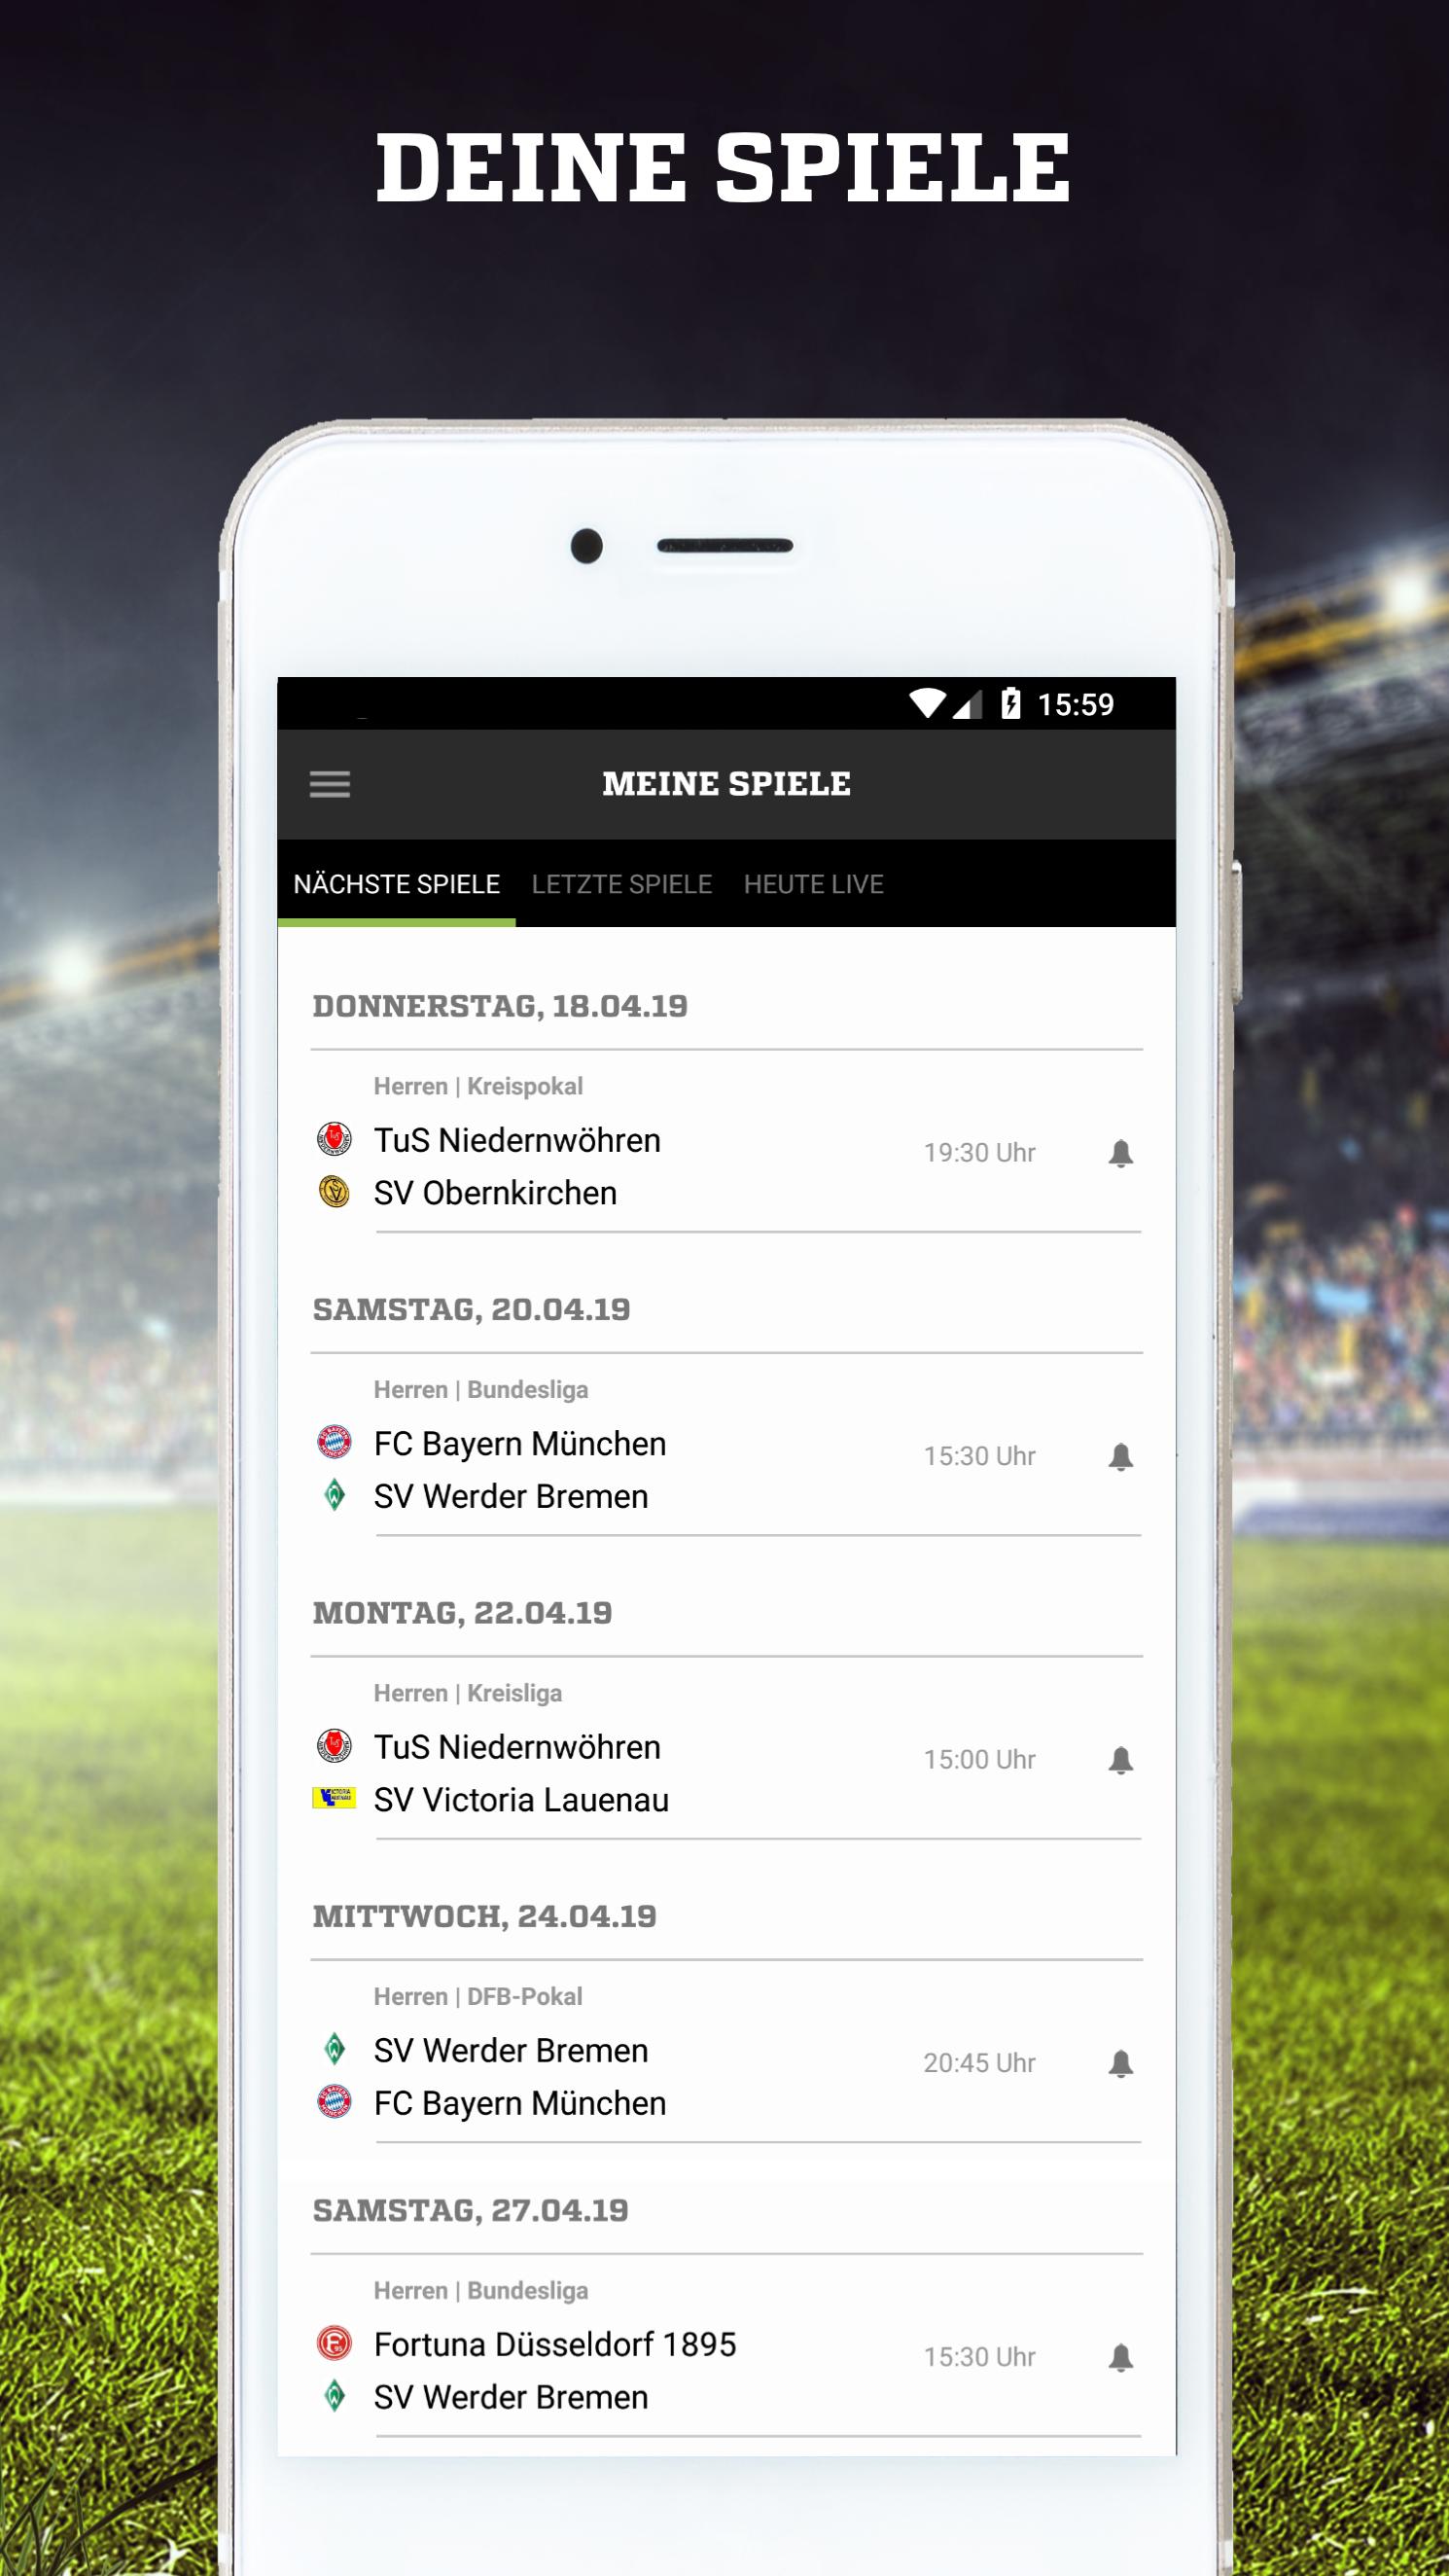 FUSSBALL.DE for Android - APK Download